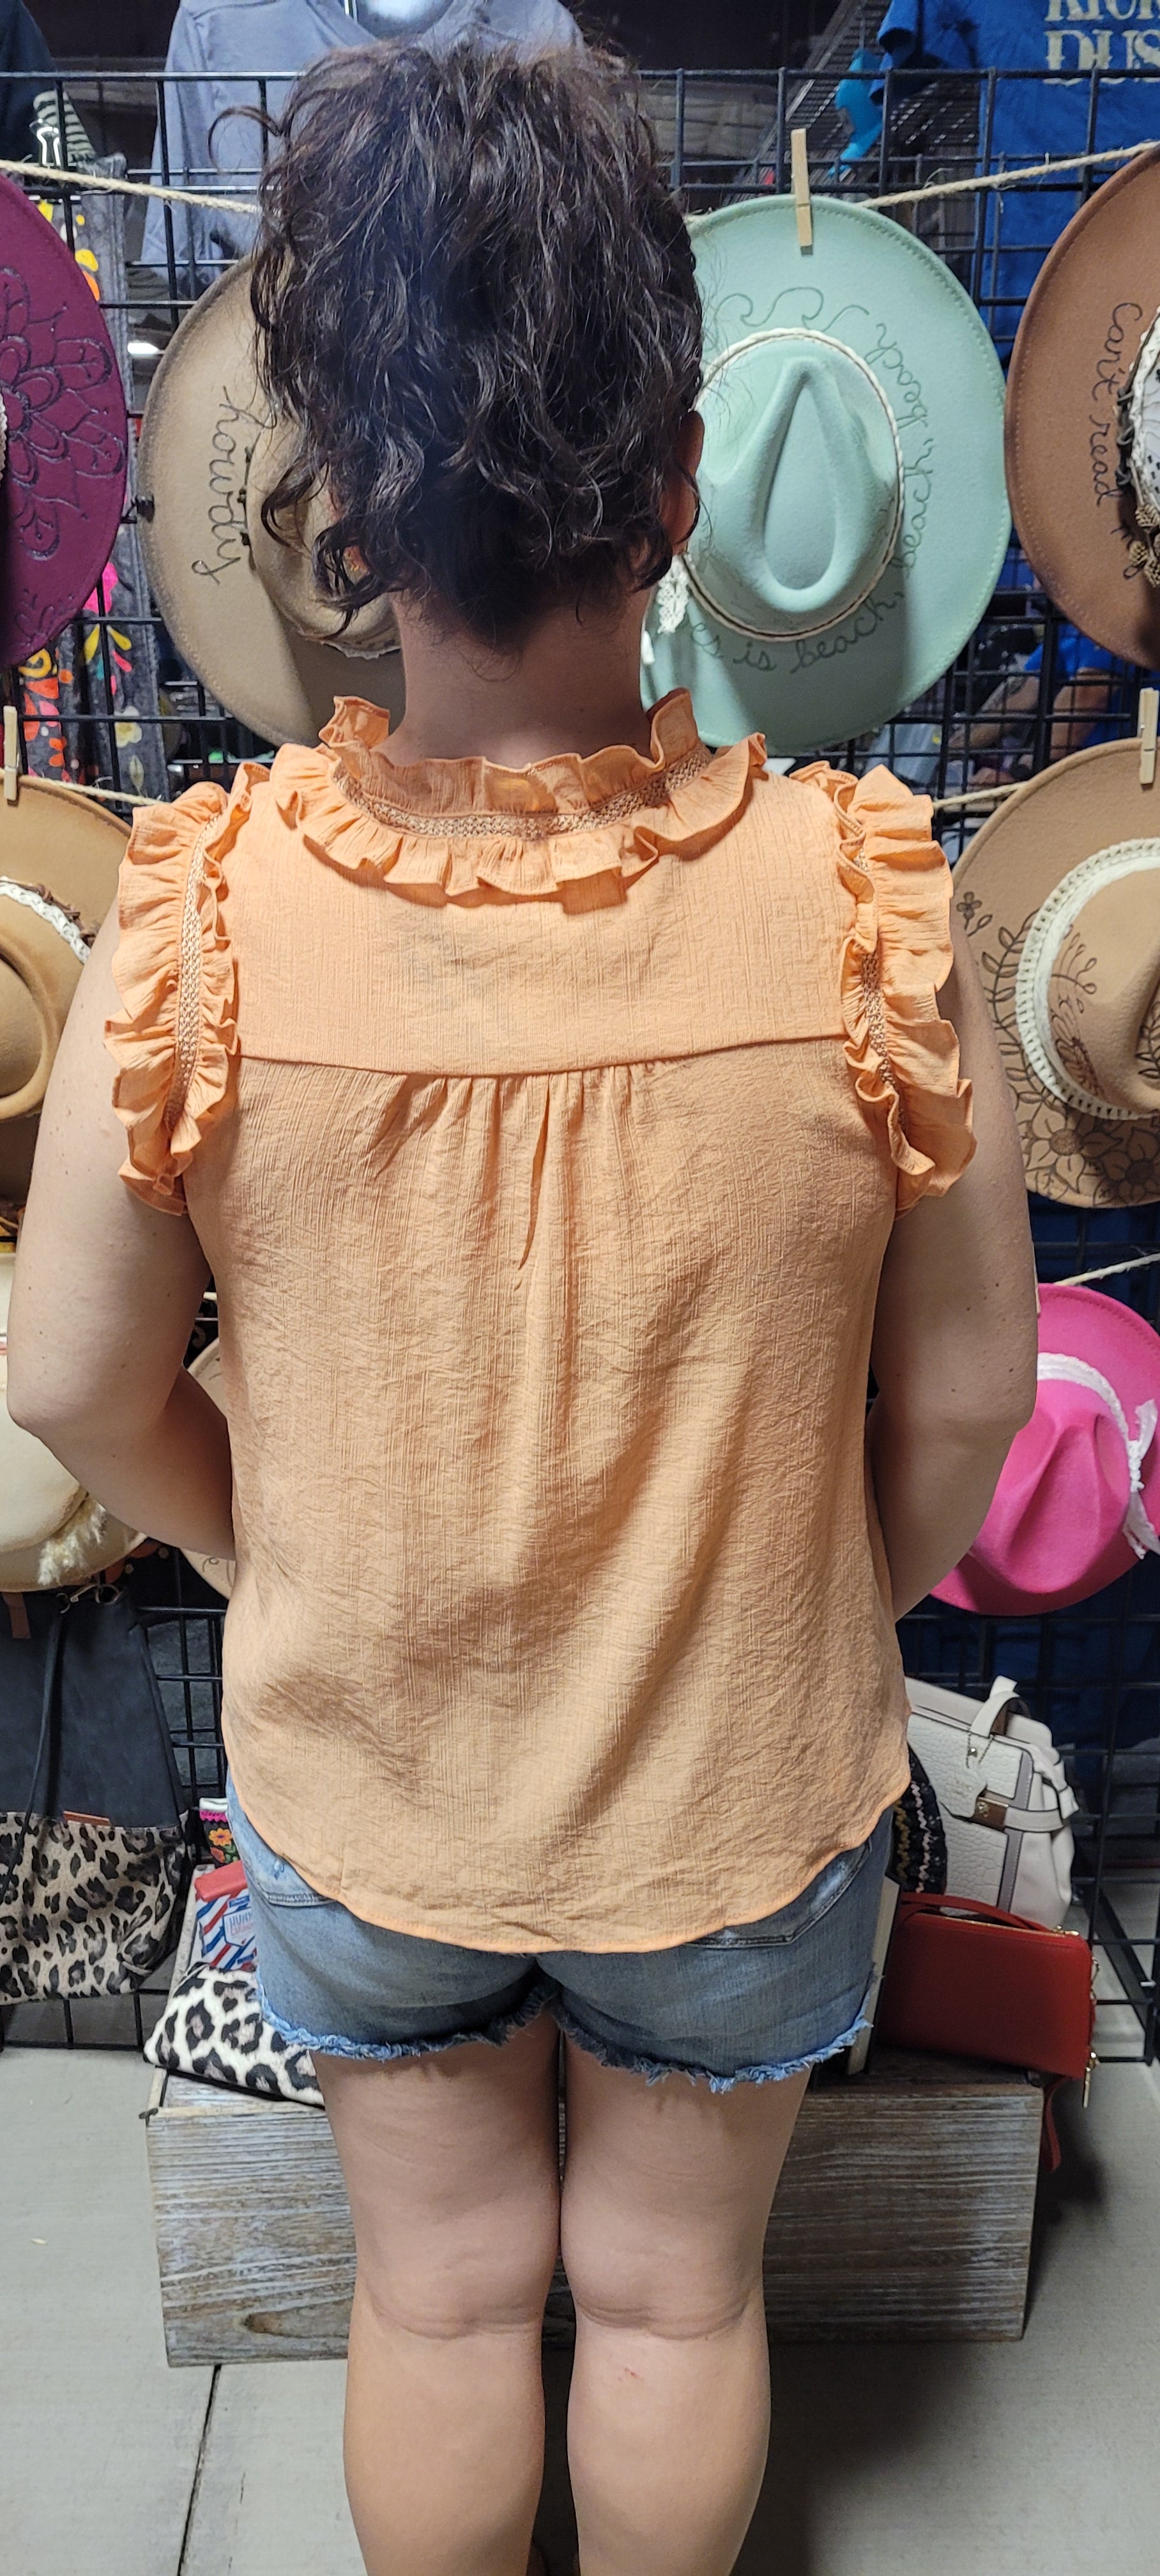 Make a splash this summer with this "Fun In The Sun Dusty Apricot" top! Indulge in the split neckline with self tie, and dance the day away with the ruffles and lace detail that flutter along the neck and arm openings. Time to unleash your carefree summer spirit! Sizes small through large.